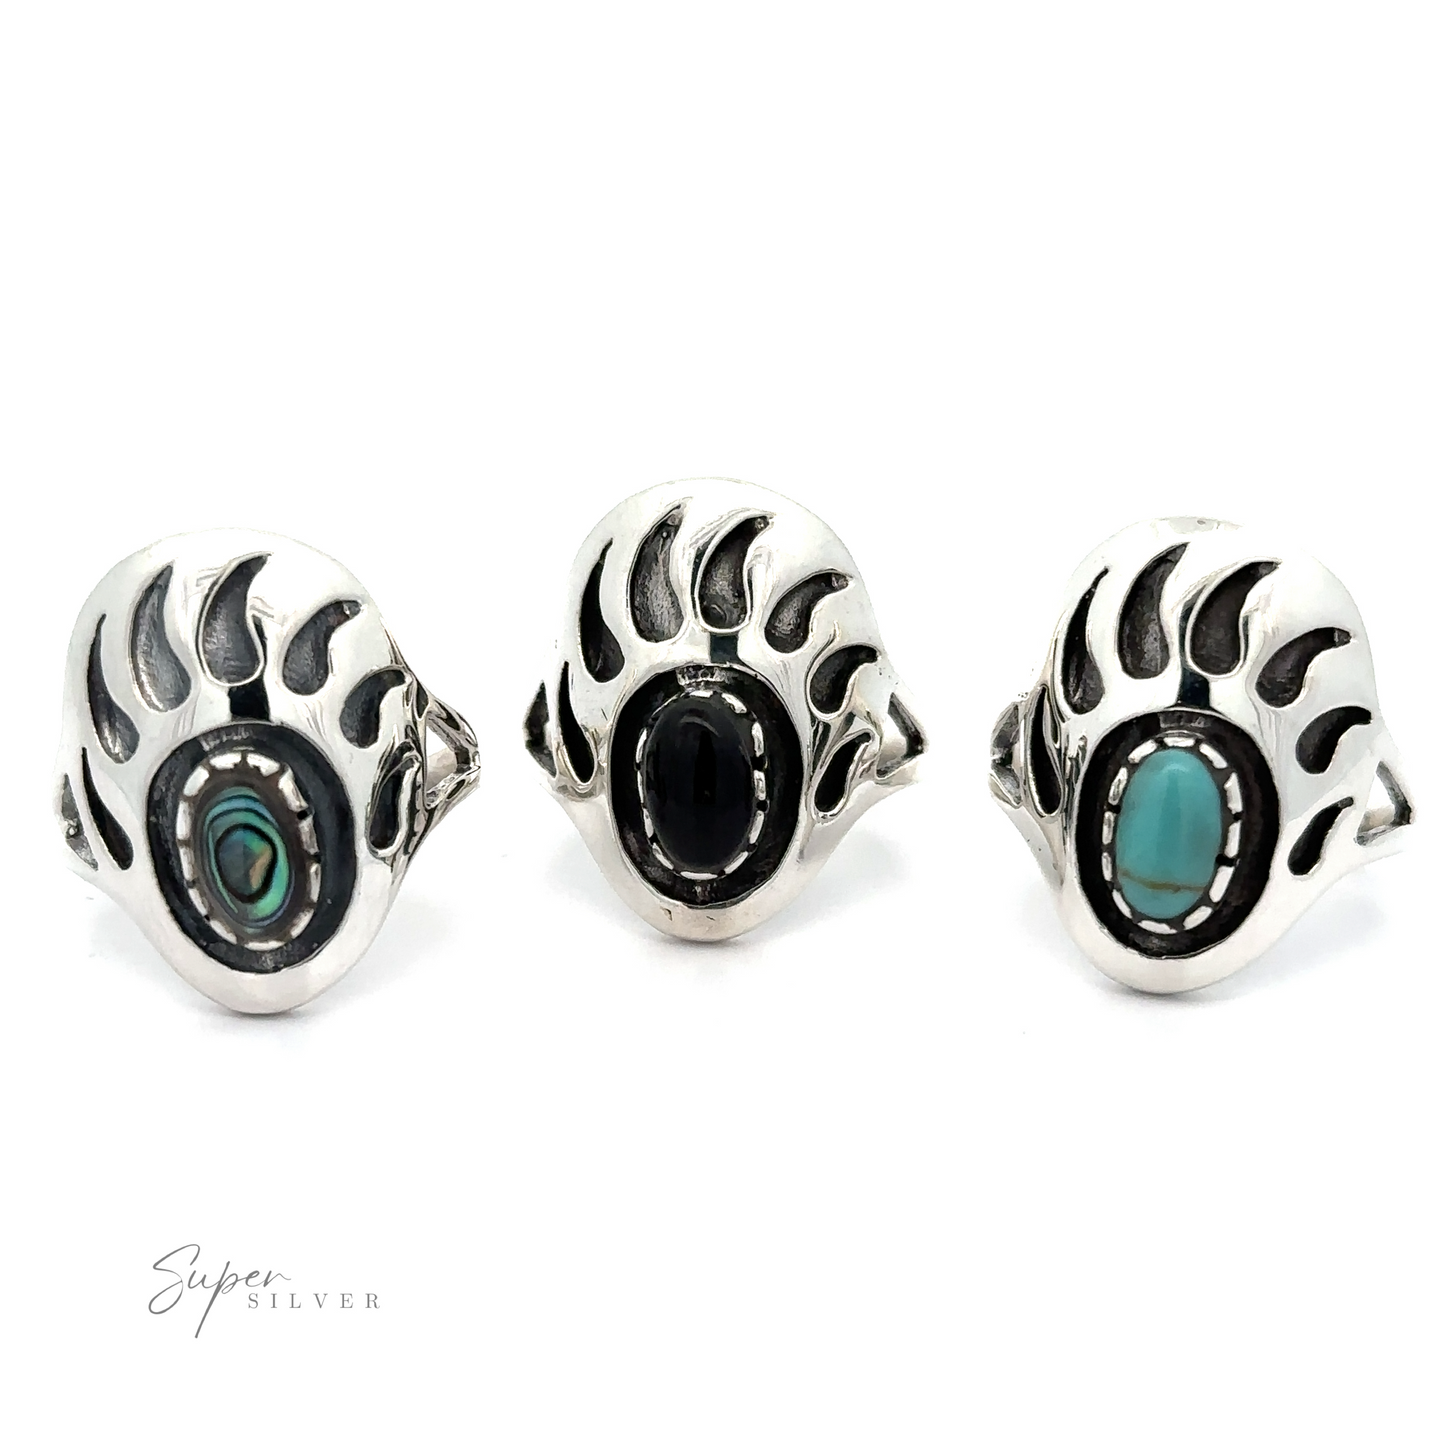 Three silver rings with turquoise stones on them, including a Stone Bear Paw ring.